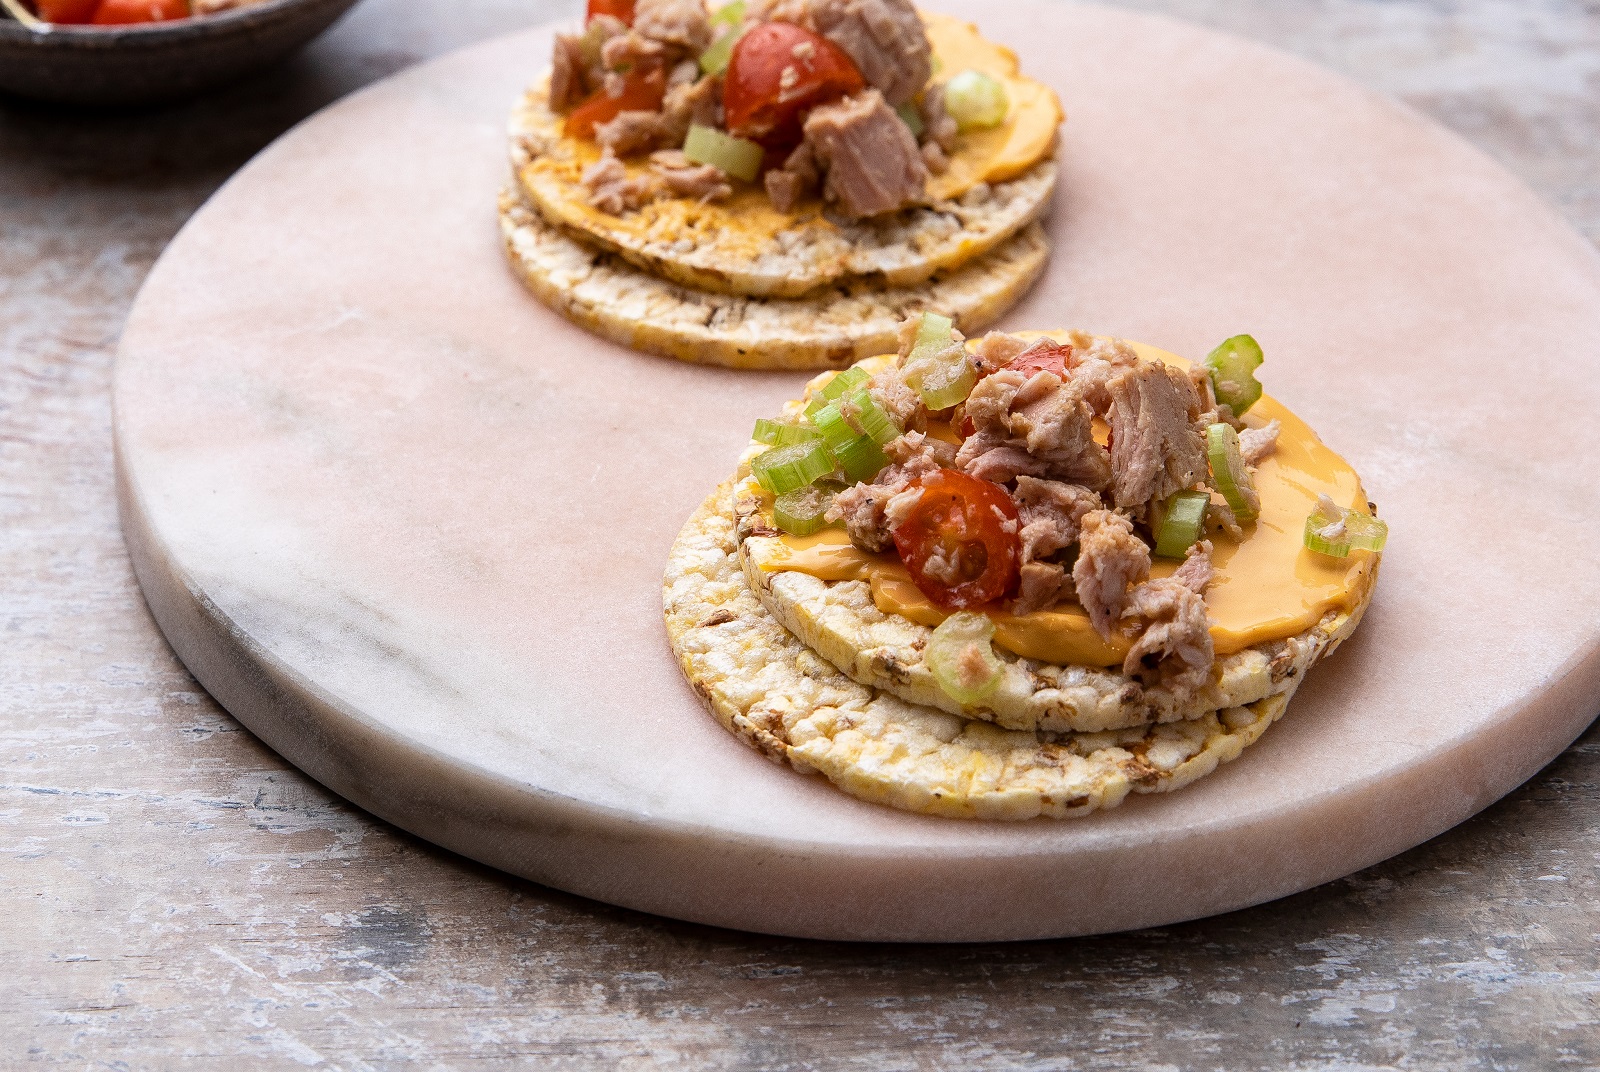 Cheese Spread, Celery, Cheery Tomatoes & Tuna on Corn Thins slices